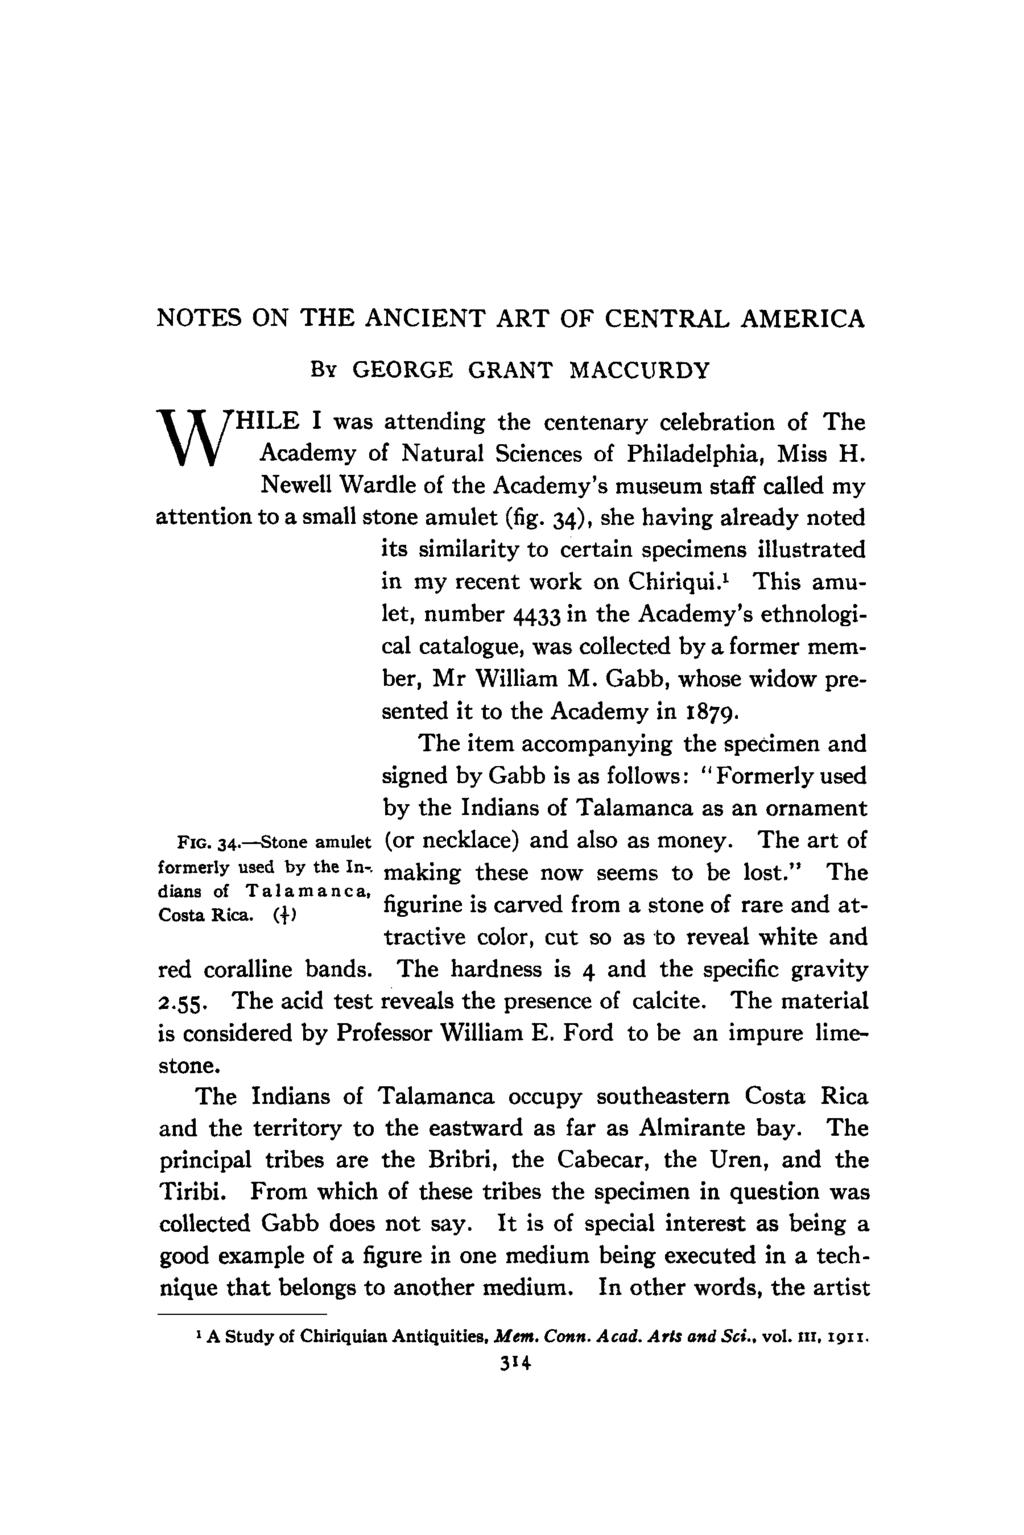 NOTES ON THE ANCIENT ART OF CENTRAL AMERICA Mi BY GEORGE GRANT MACCURDY HILE I was attending the centenary celebration of The Academy of Natural Sciences of Philadelphia, Miss H.